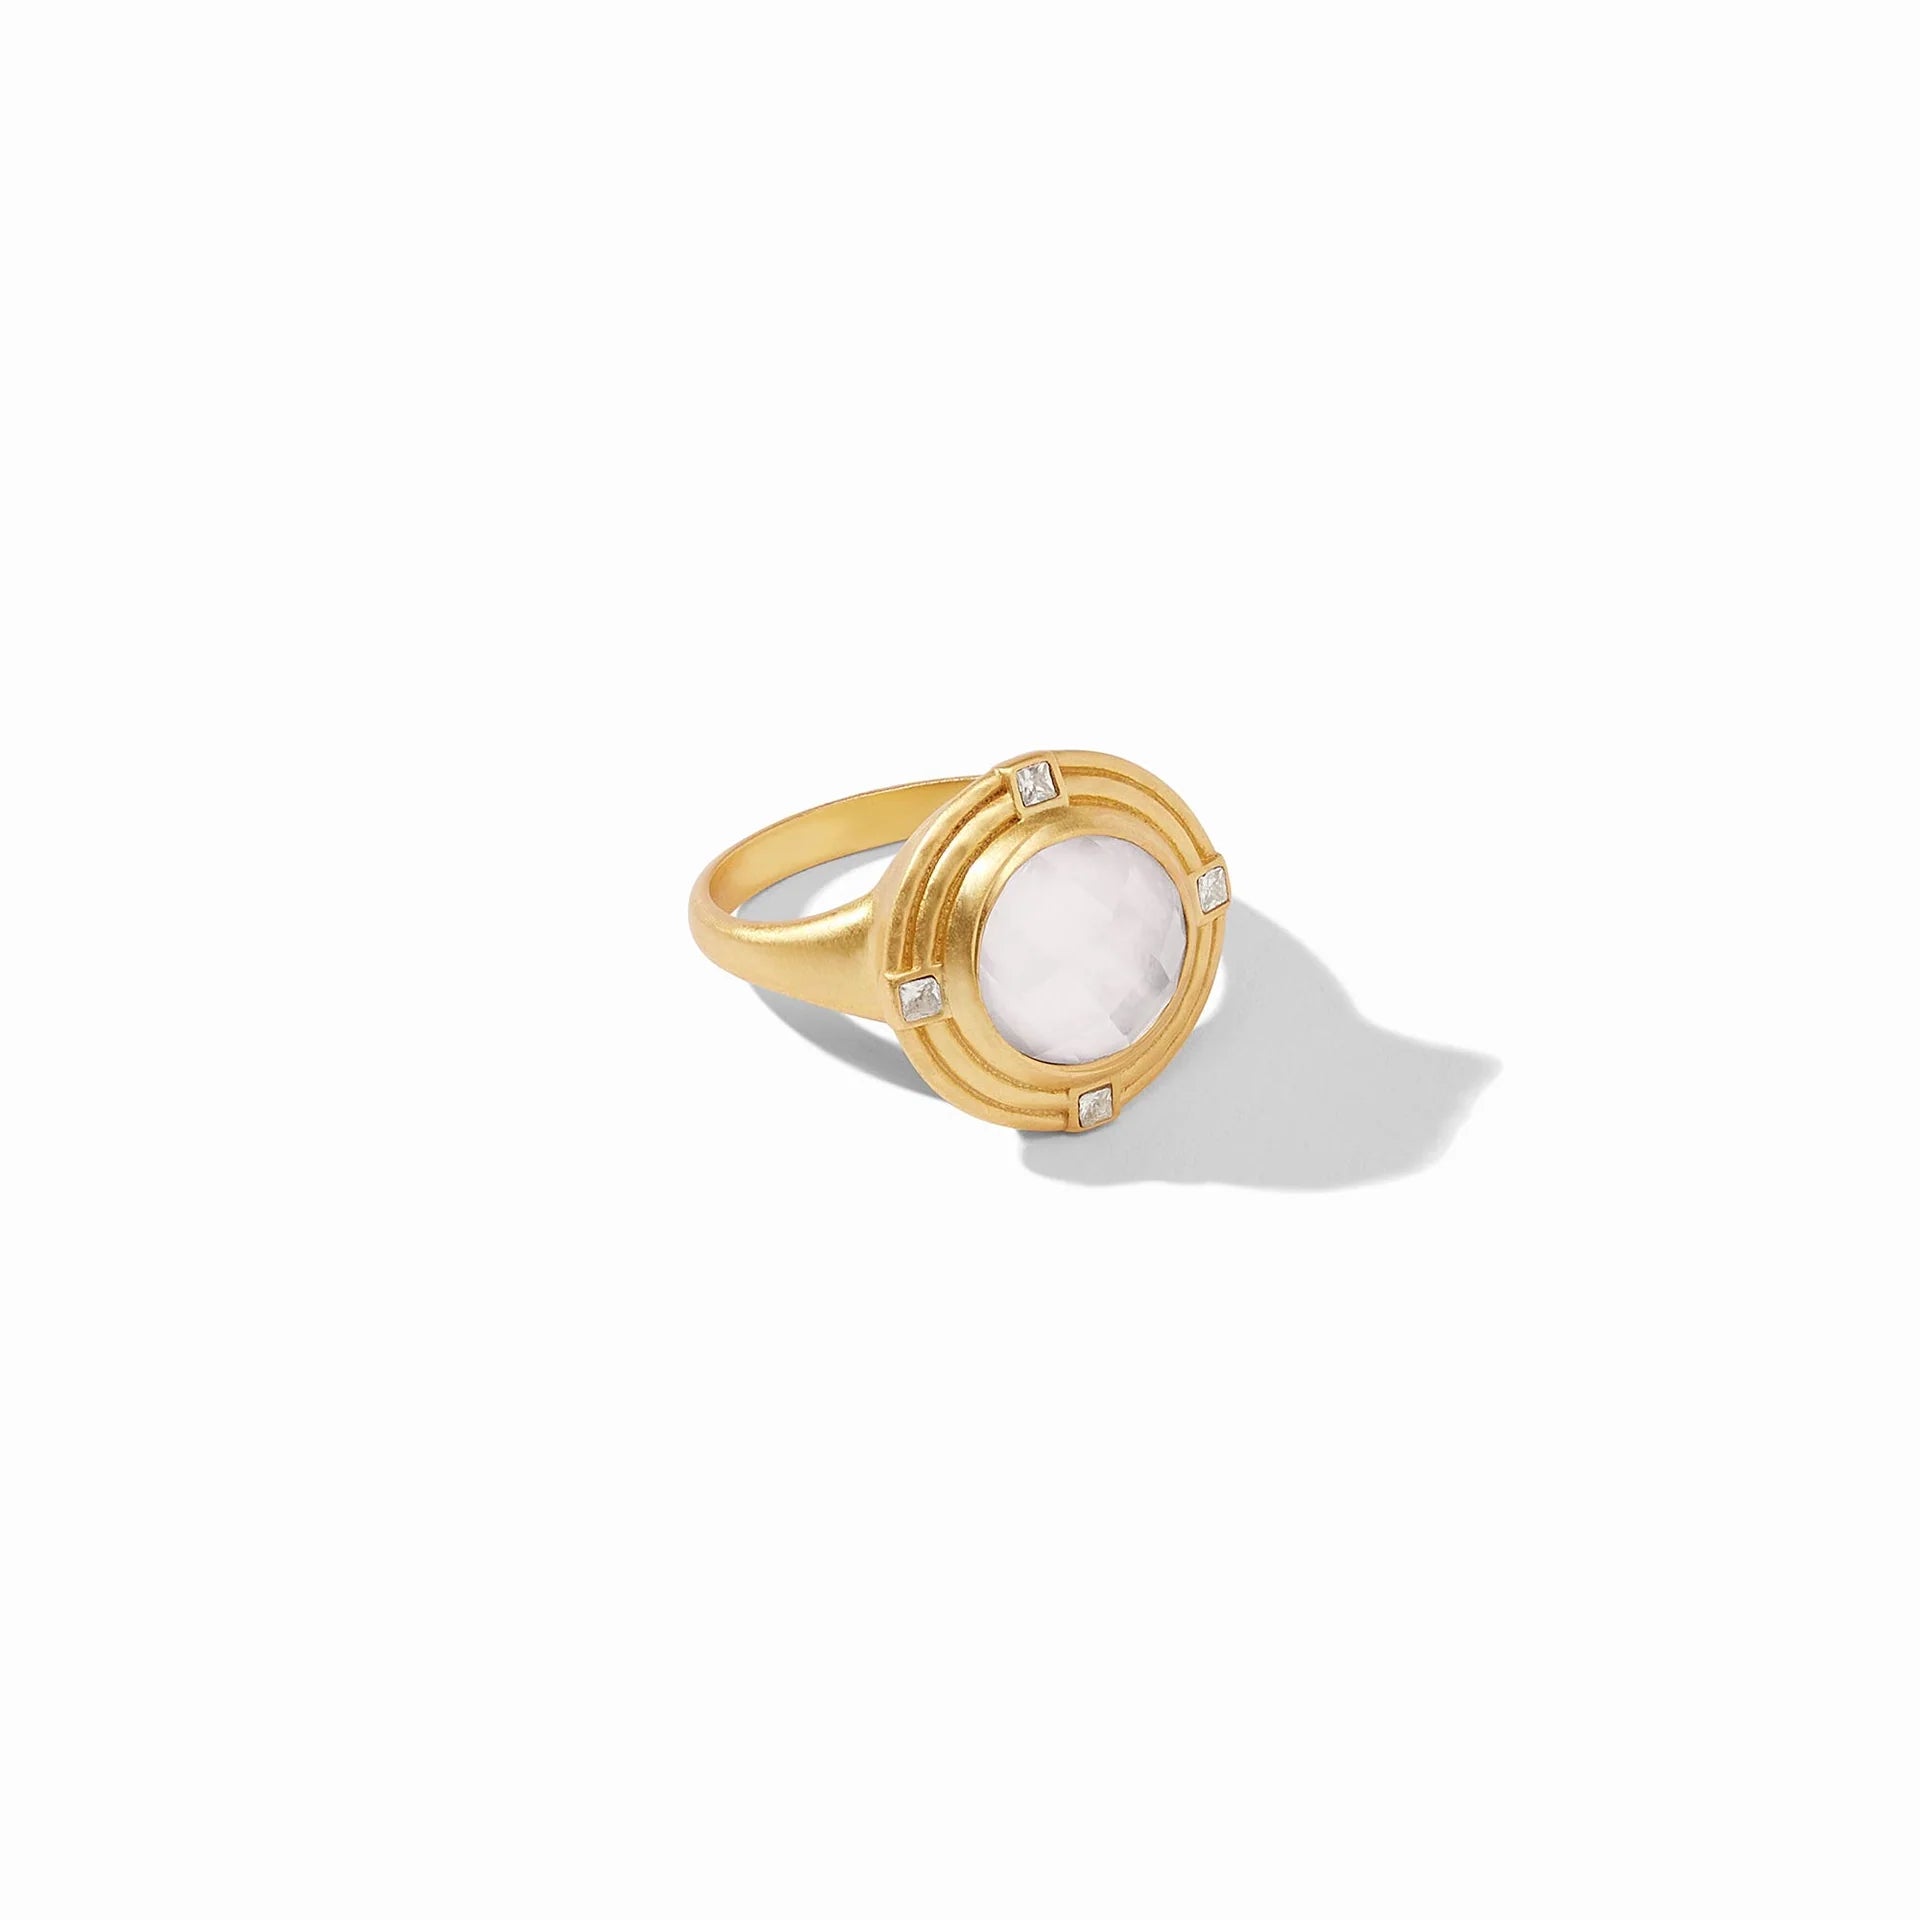 Astor Ring - Iridescent Clear Crystal by Julie Vos signet ring featuring a sparkling rose cut gem set in a surround of two lightly hammered golden walls embellished with four CZs.  24K gold plate, imported glass, CZ Width: 0.65 inches. Shop at The Painted Cottage an Annapolis boutique.